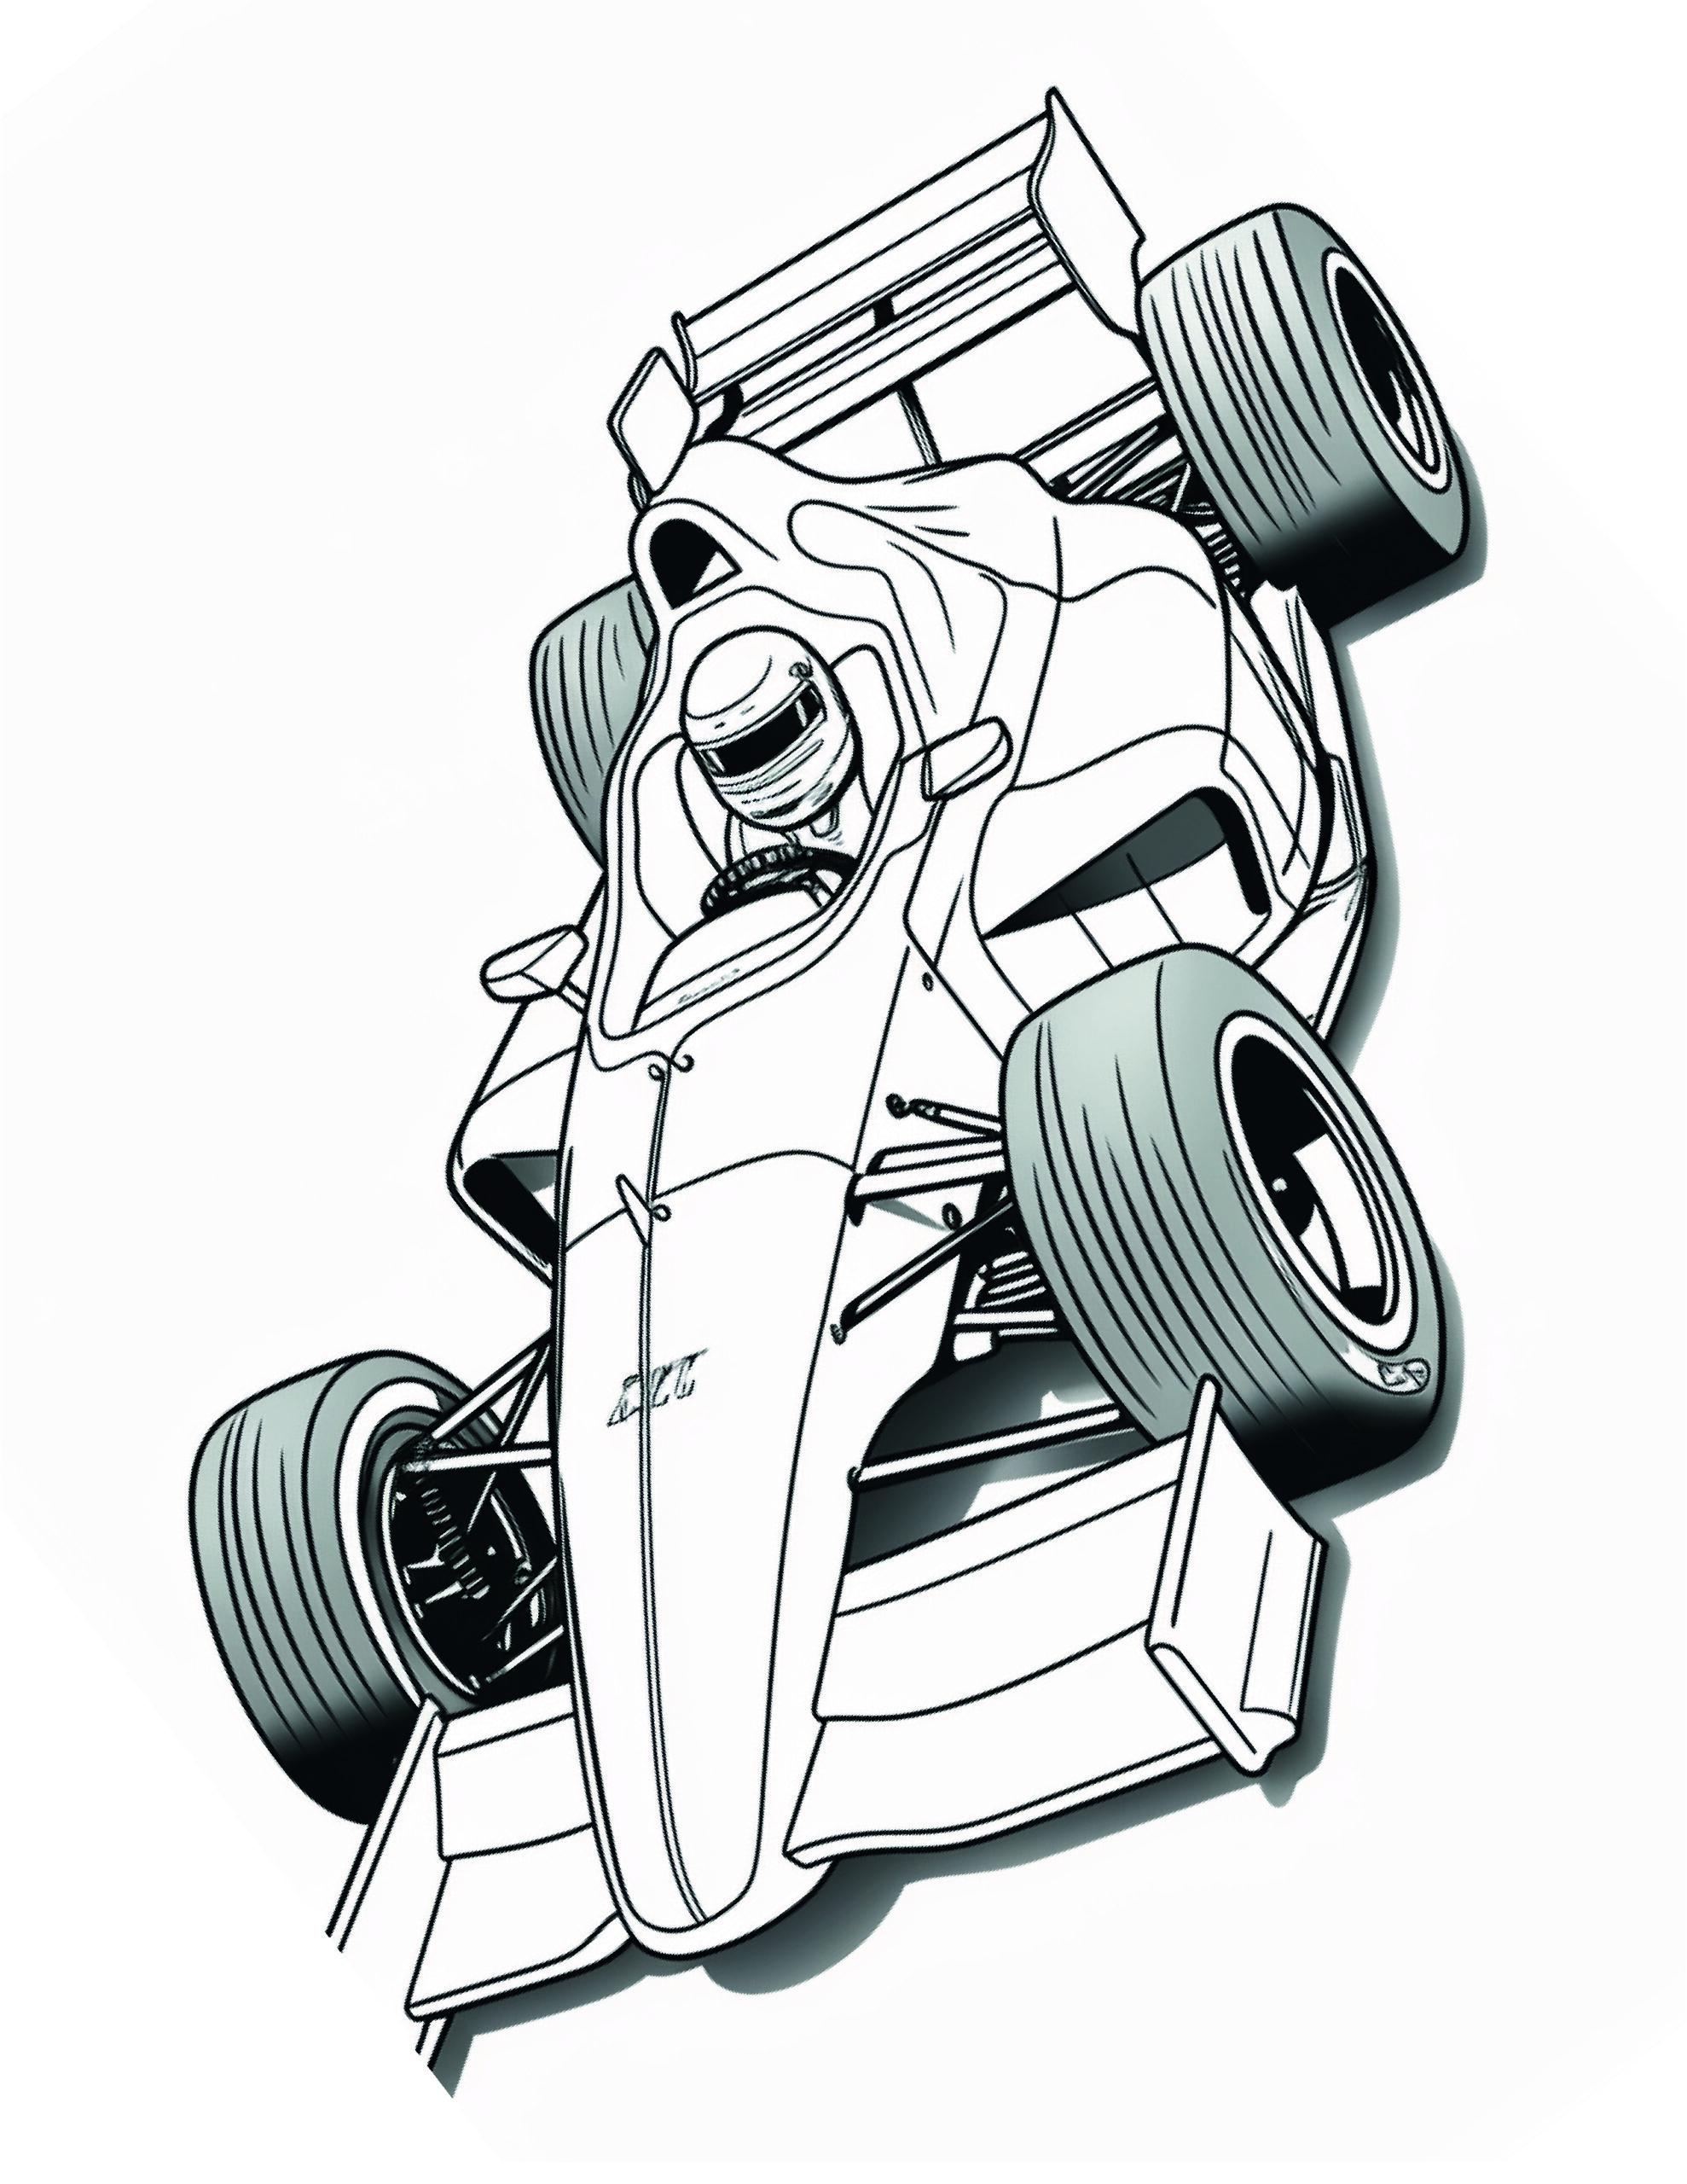 Skip to Your Lou - Race Car Coloring Pages - A line drawing of the outline of a formula one car, with dark shaded tires.